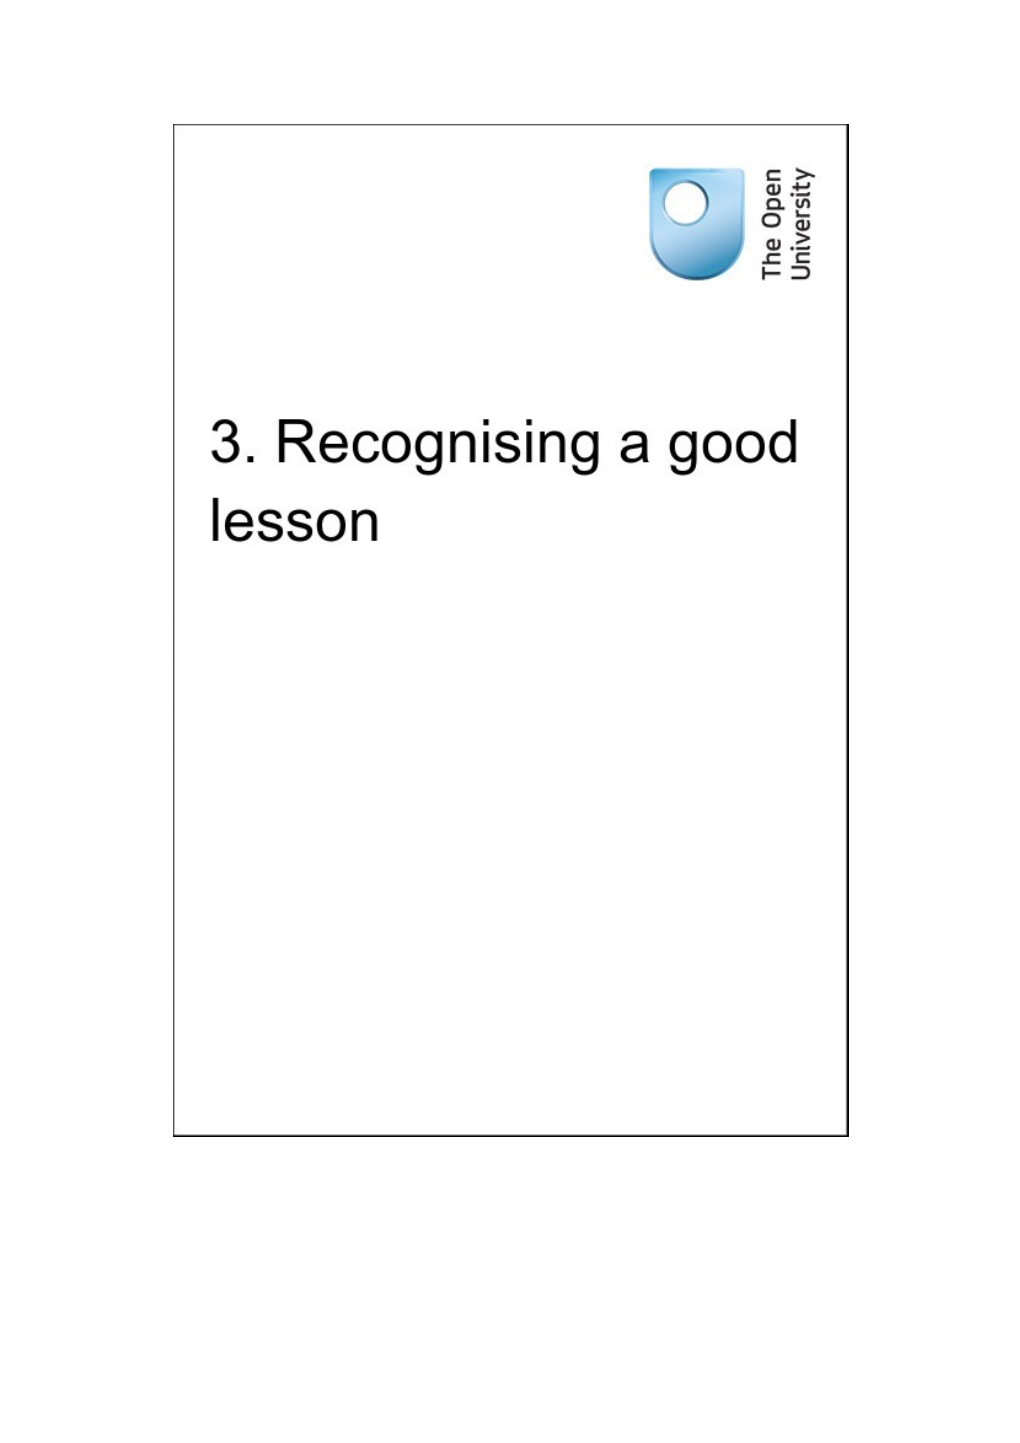 3. Recognising a Good Lesson